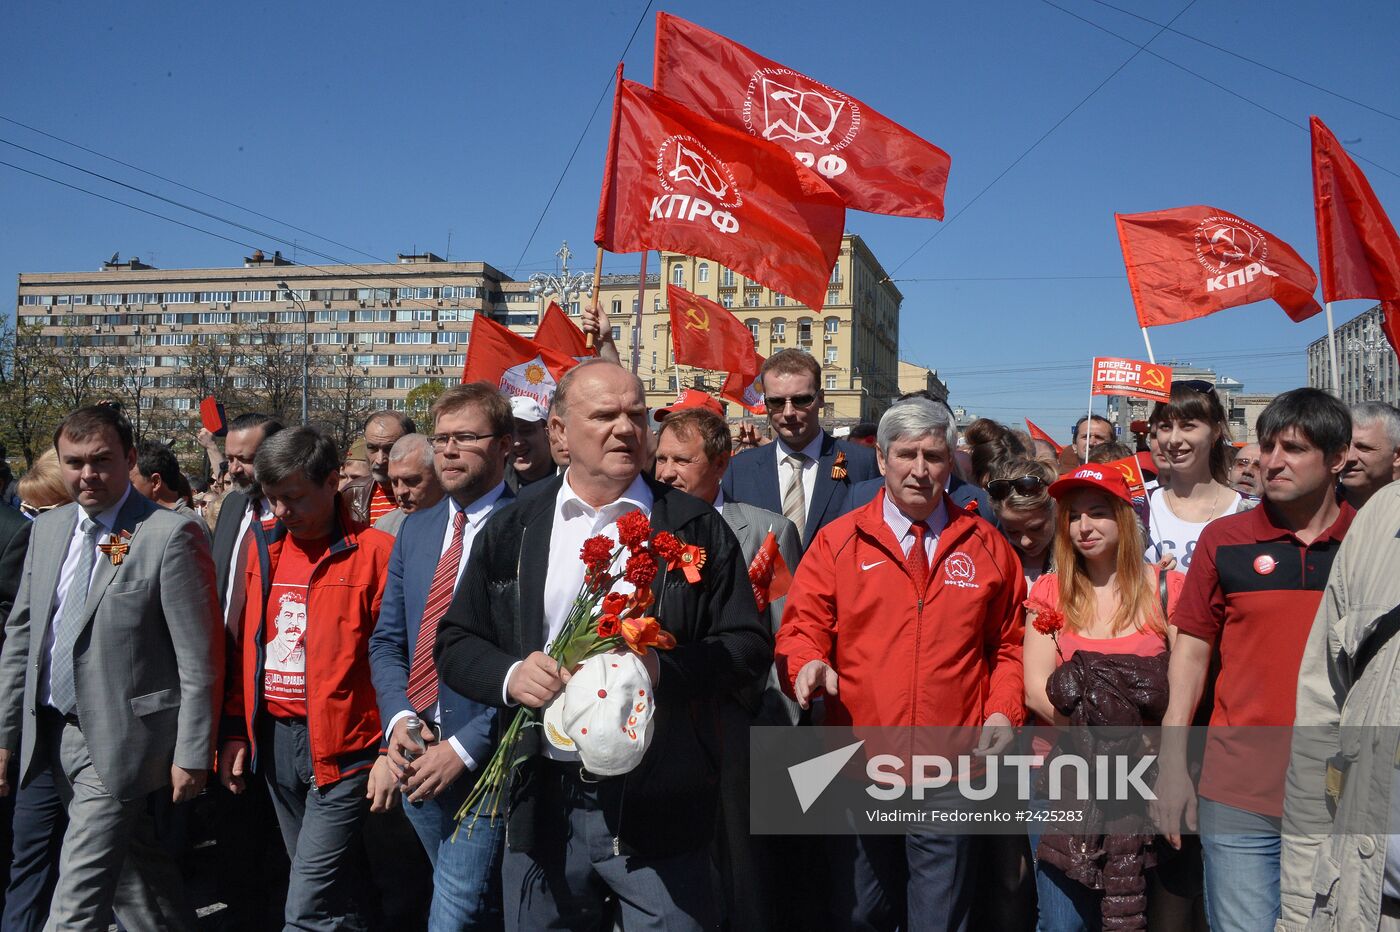 Communist party's rally on 69th anniversary of Victory in Great Patriotic War